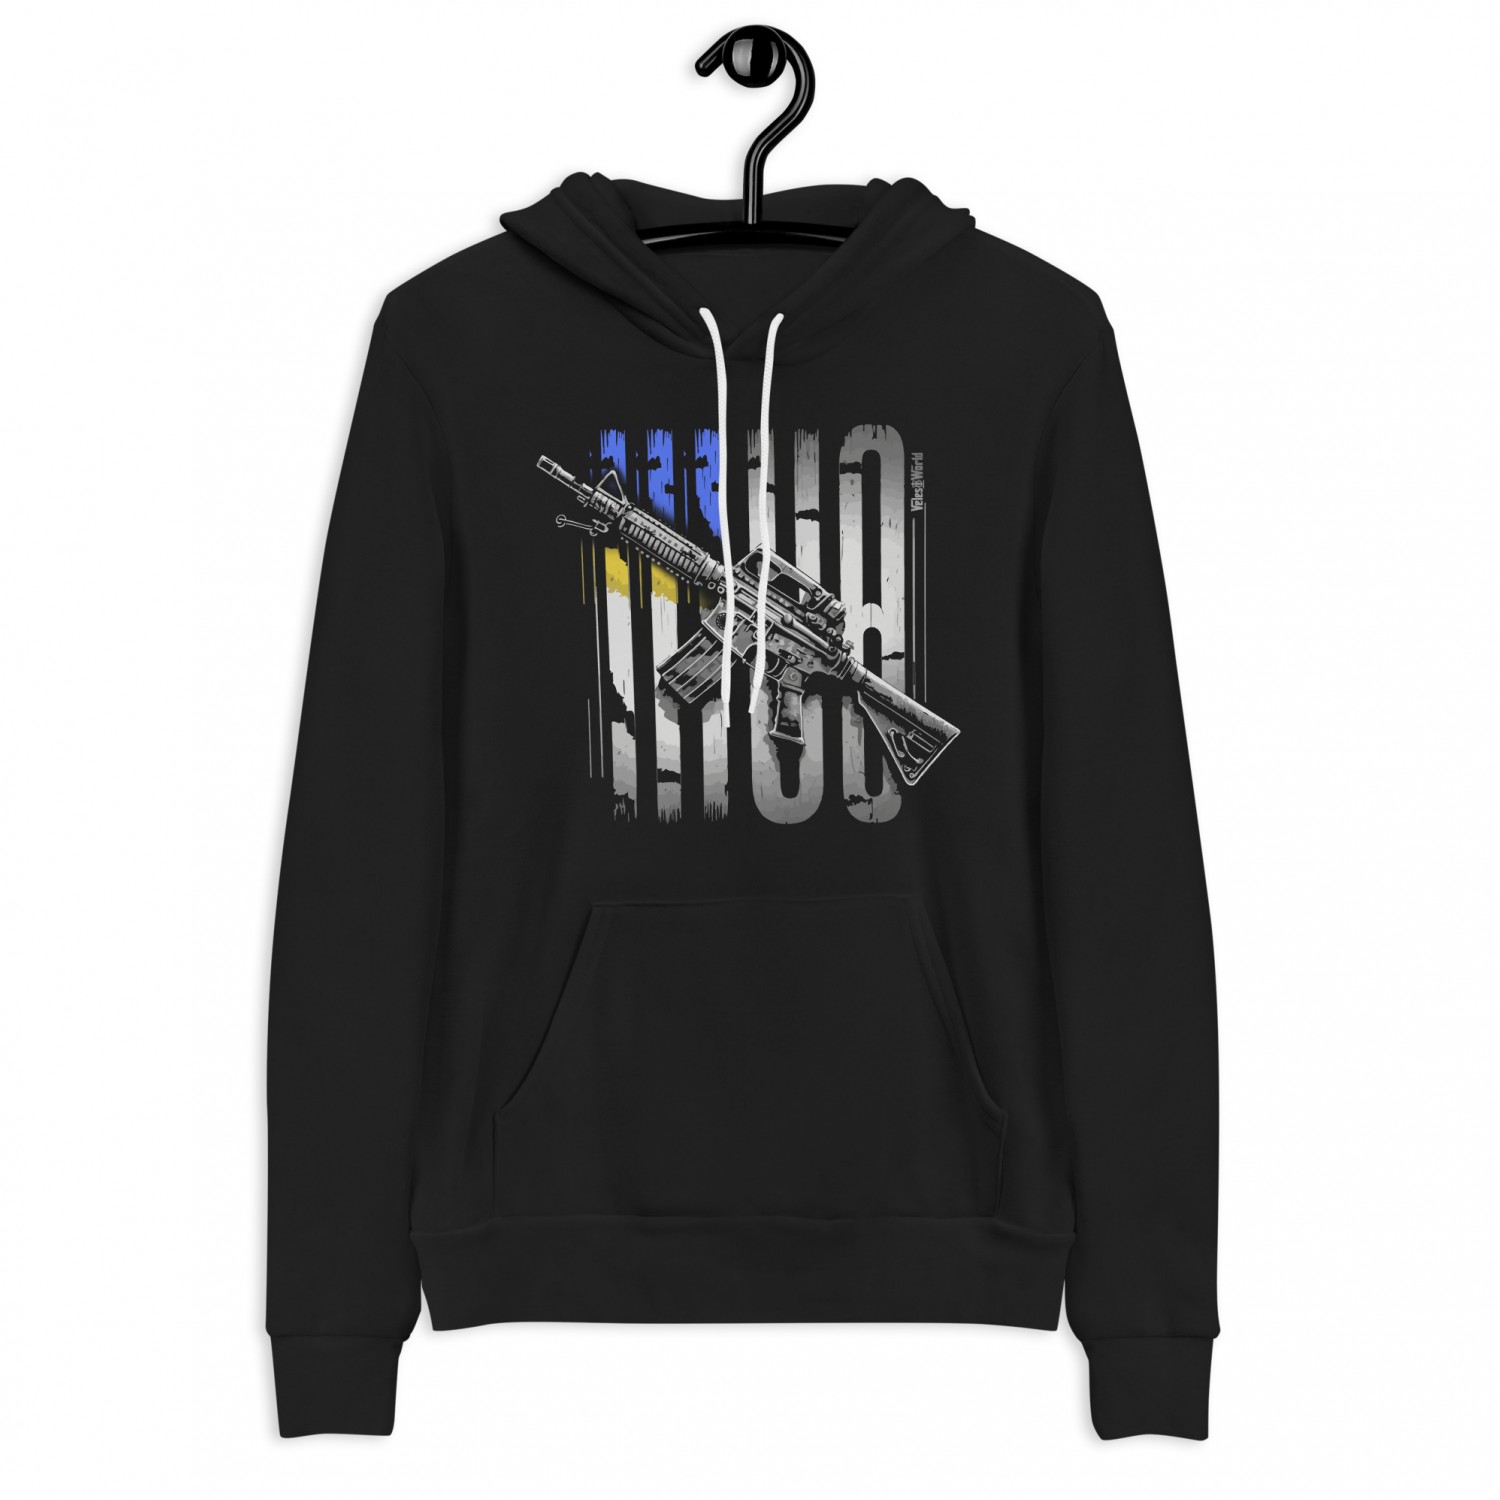 Buy Hoodie with "M-16" weapon